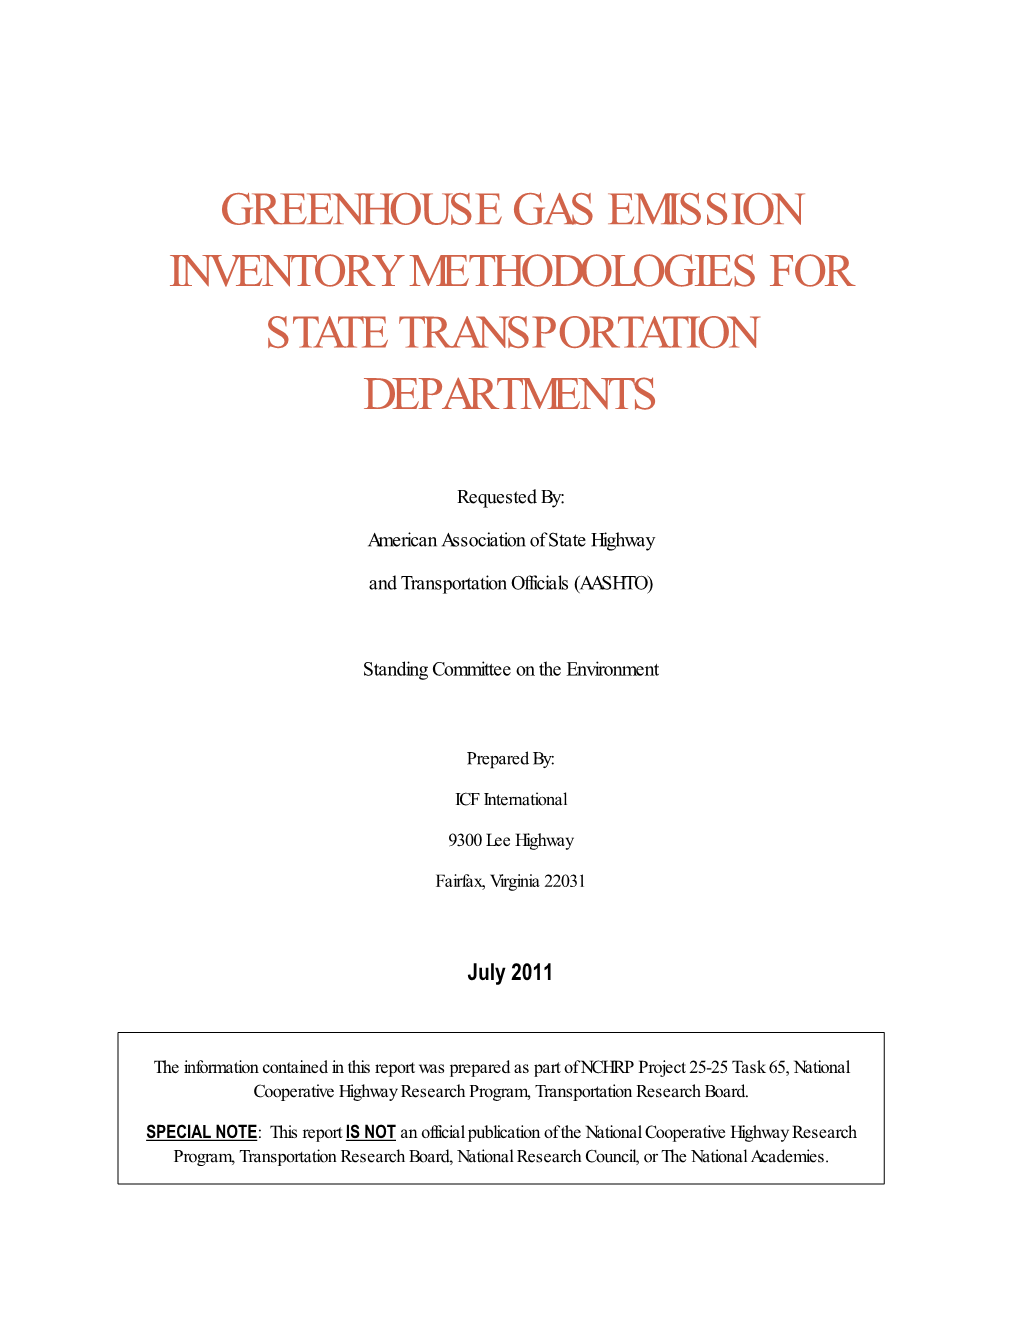 Greenhouse Gas Emission Inventory Methodologies for State Transportation Departments